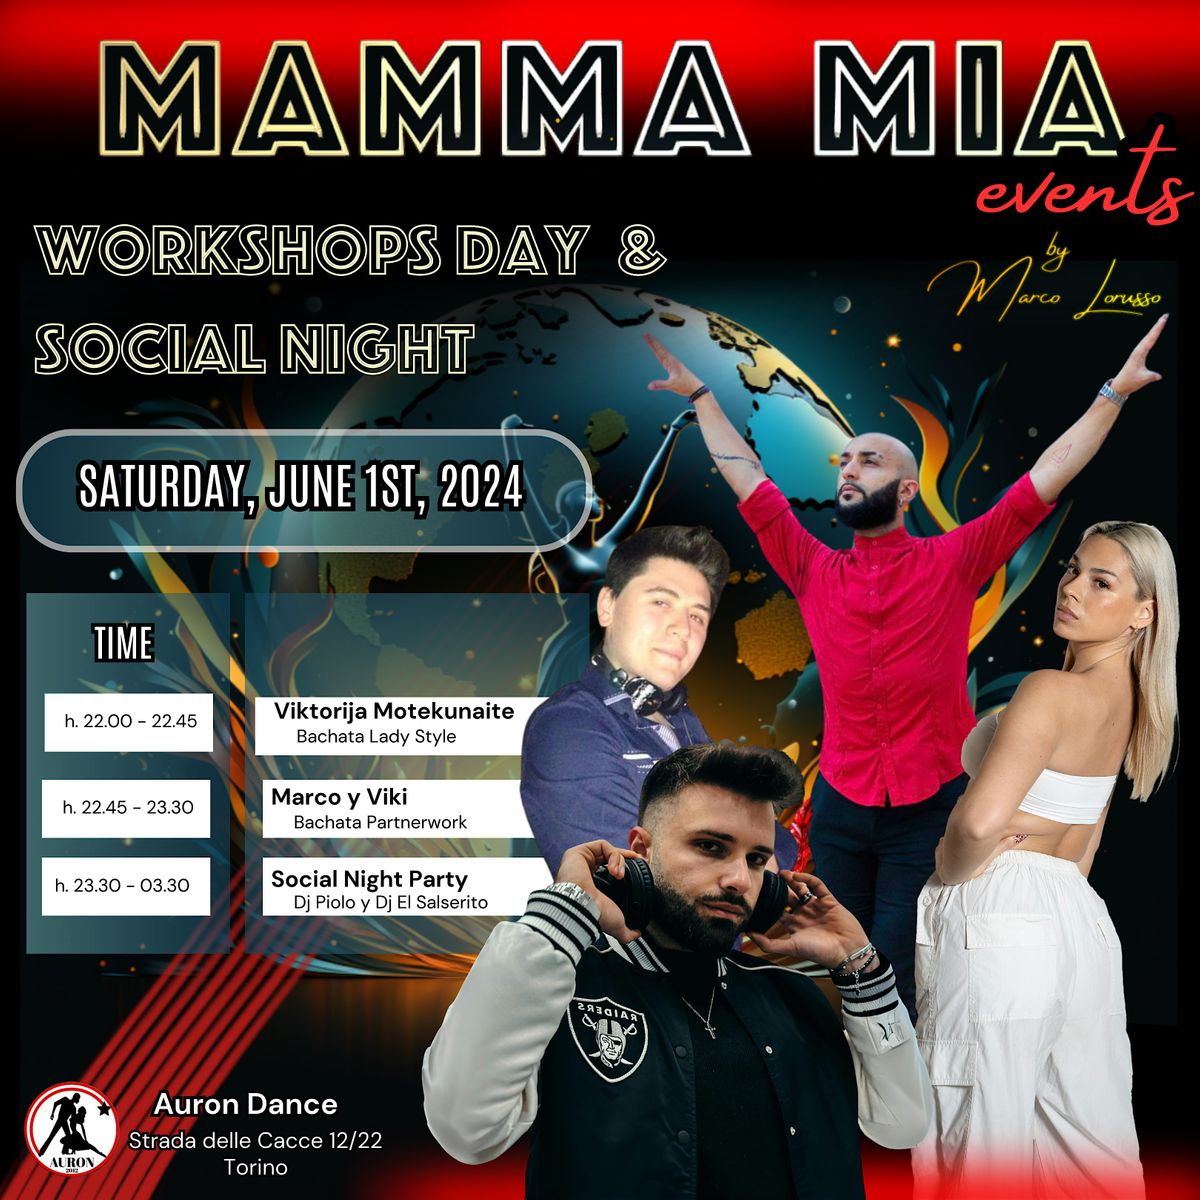 MAMMA MIA event - June 1st, 2024 - Social Night and Workshops Day